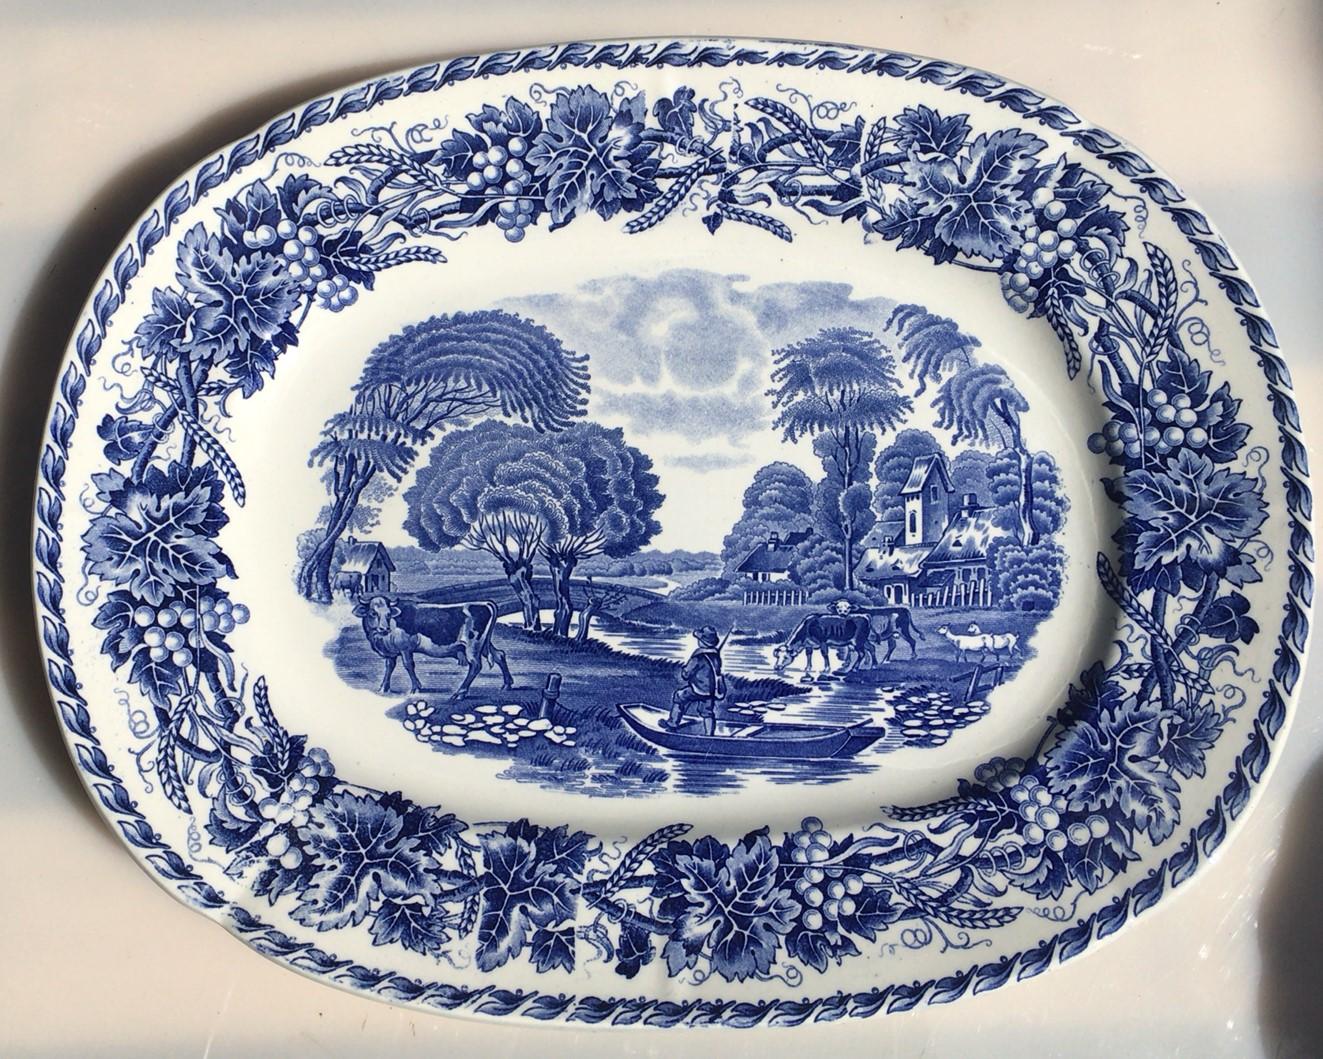 19th century large blue and white French transferware platter signed Utzschneider & Cie (Sarreguemines)
Model Helvetia.
Scene with fisherman, cows, trees and river.
Border with grapes and wheat.
Measures: 15